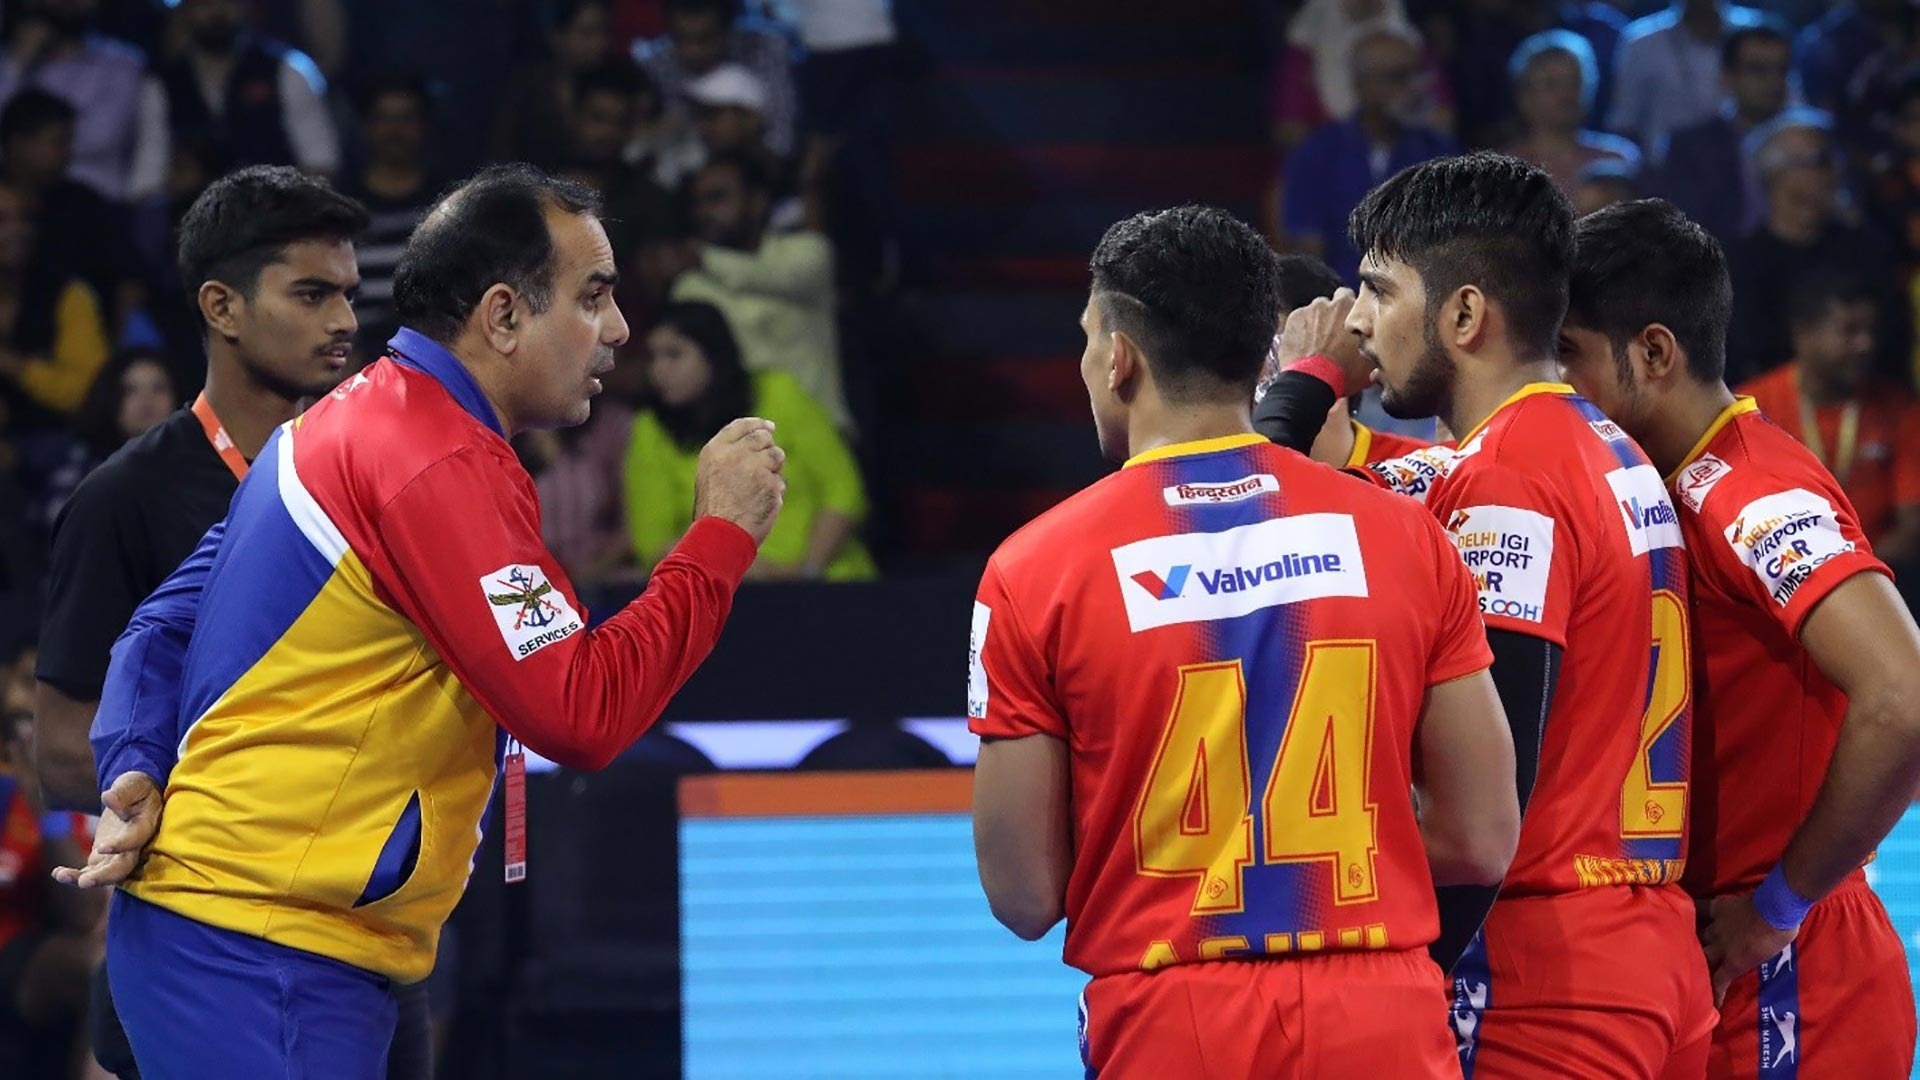 PKL 2019 | Entry into top 6 extremely gratifying, says Jasveer Singh